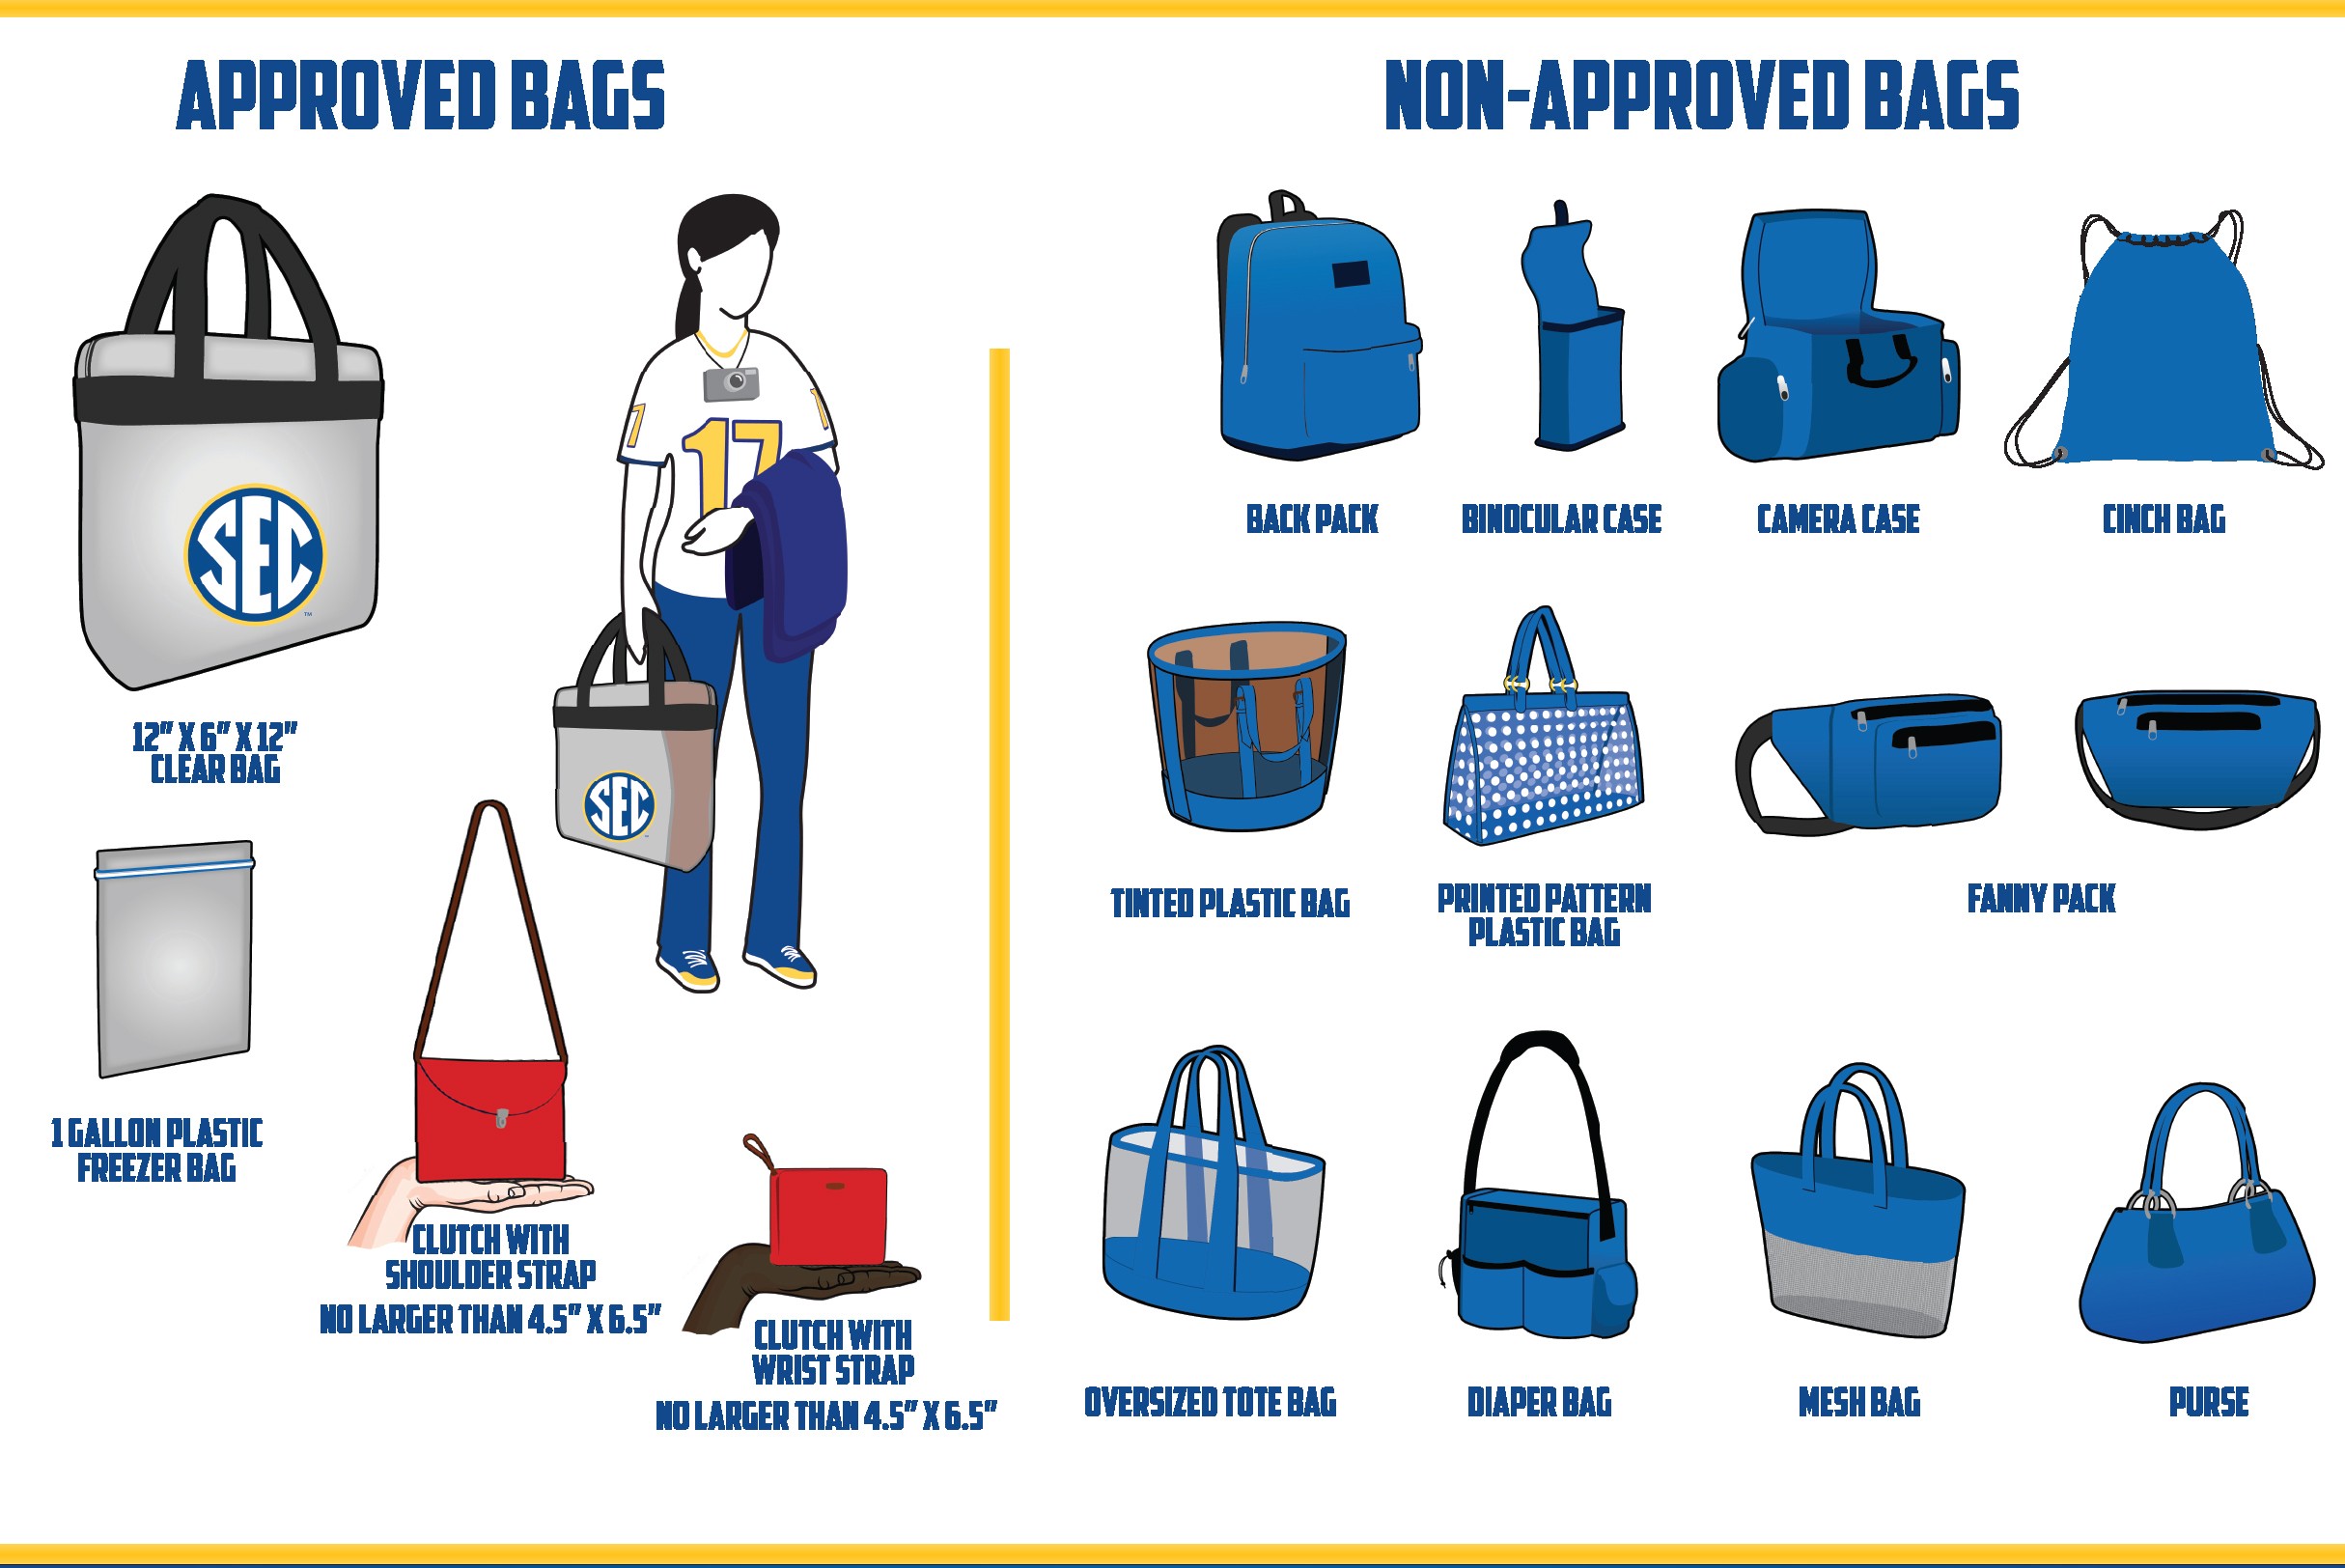 Reminder Clear bag policy in effect on Saturday